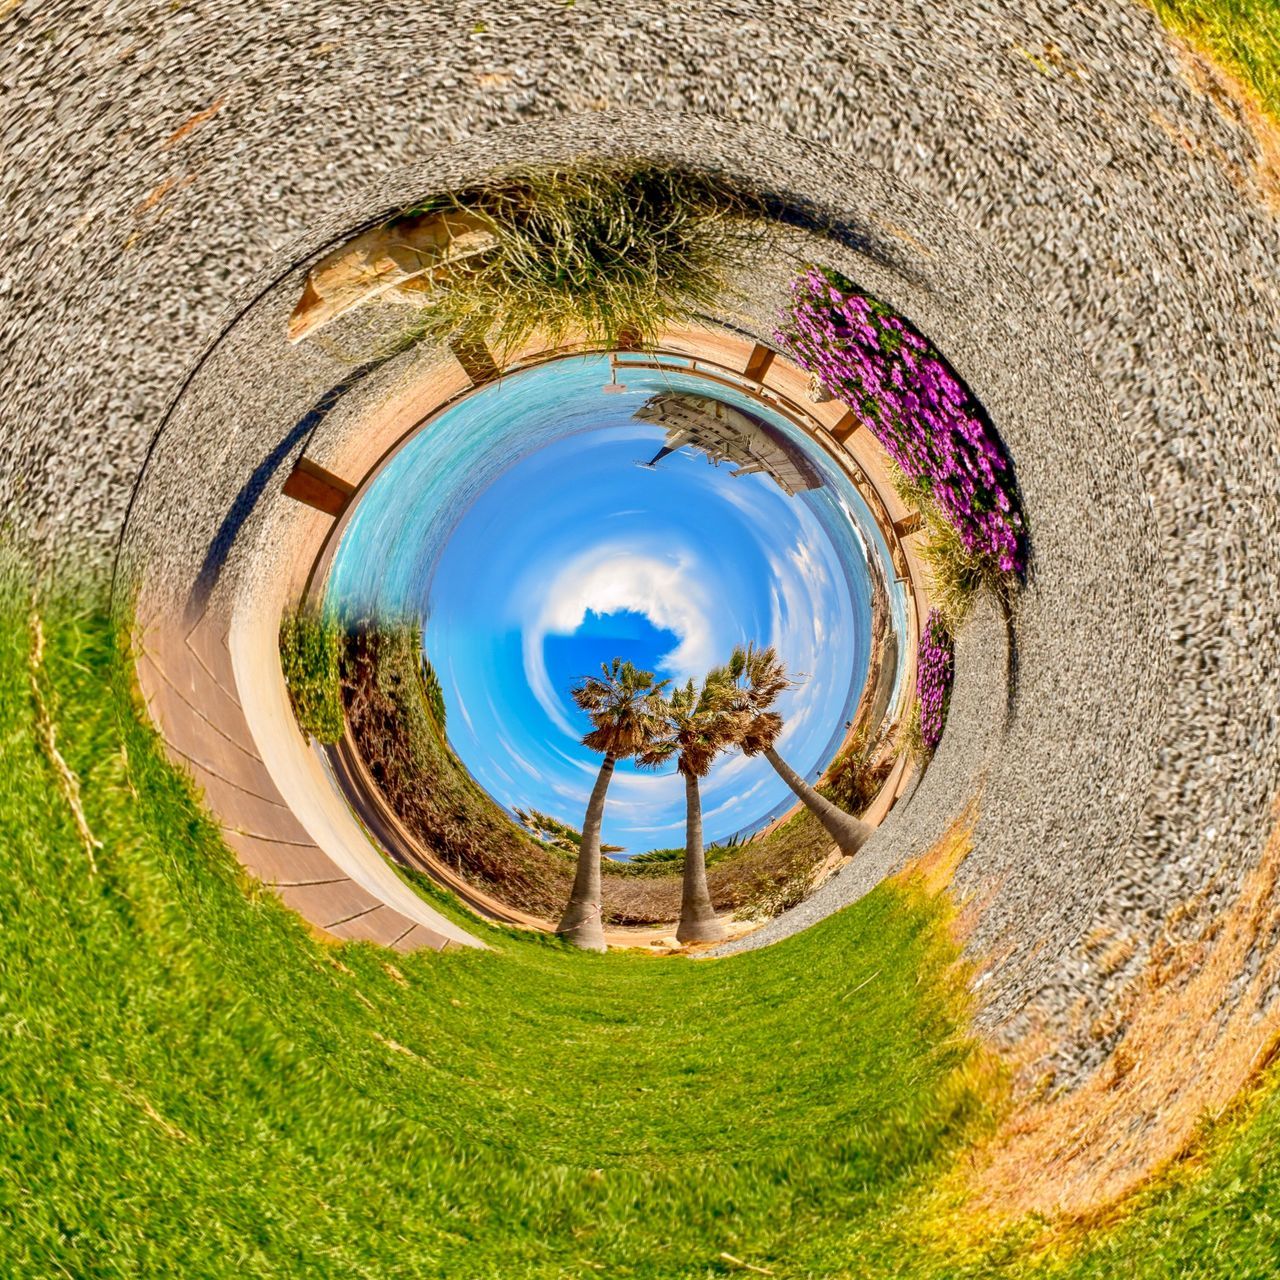 plant, grass, nature, day, geometric shape, circle, tree, shape, no people, well, architecture, fish-eye lens, outdoors, water, built structure, reflection, land, field, wall - building feature, digital composite